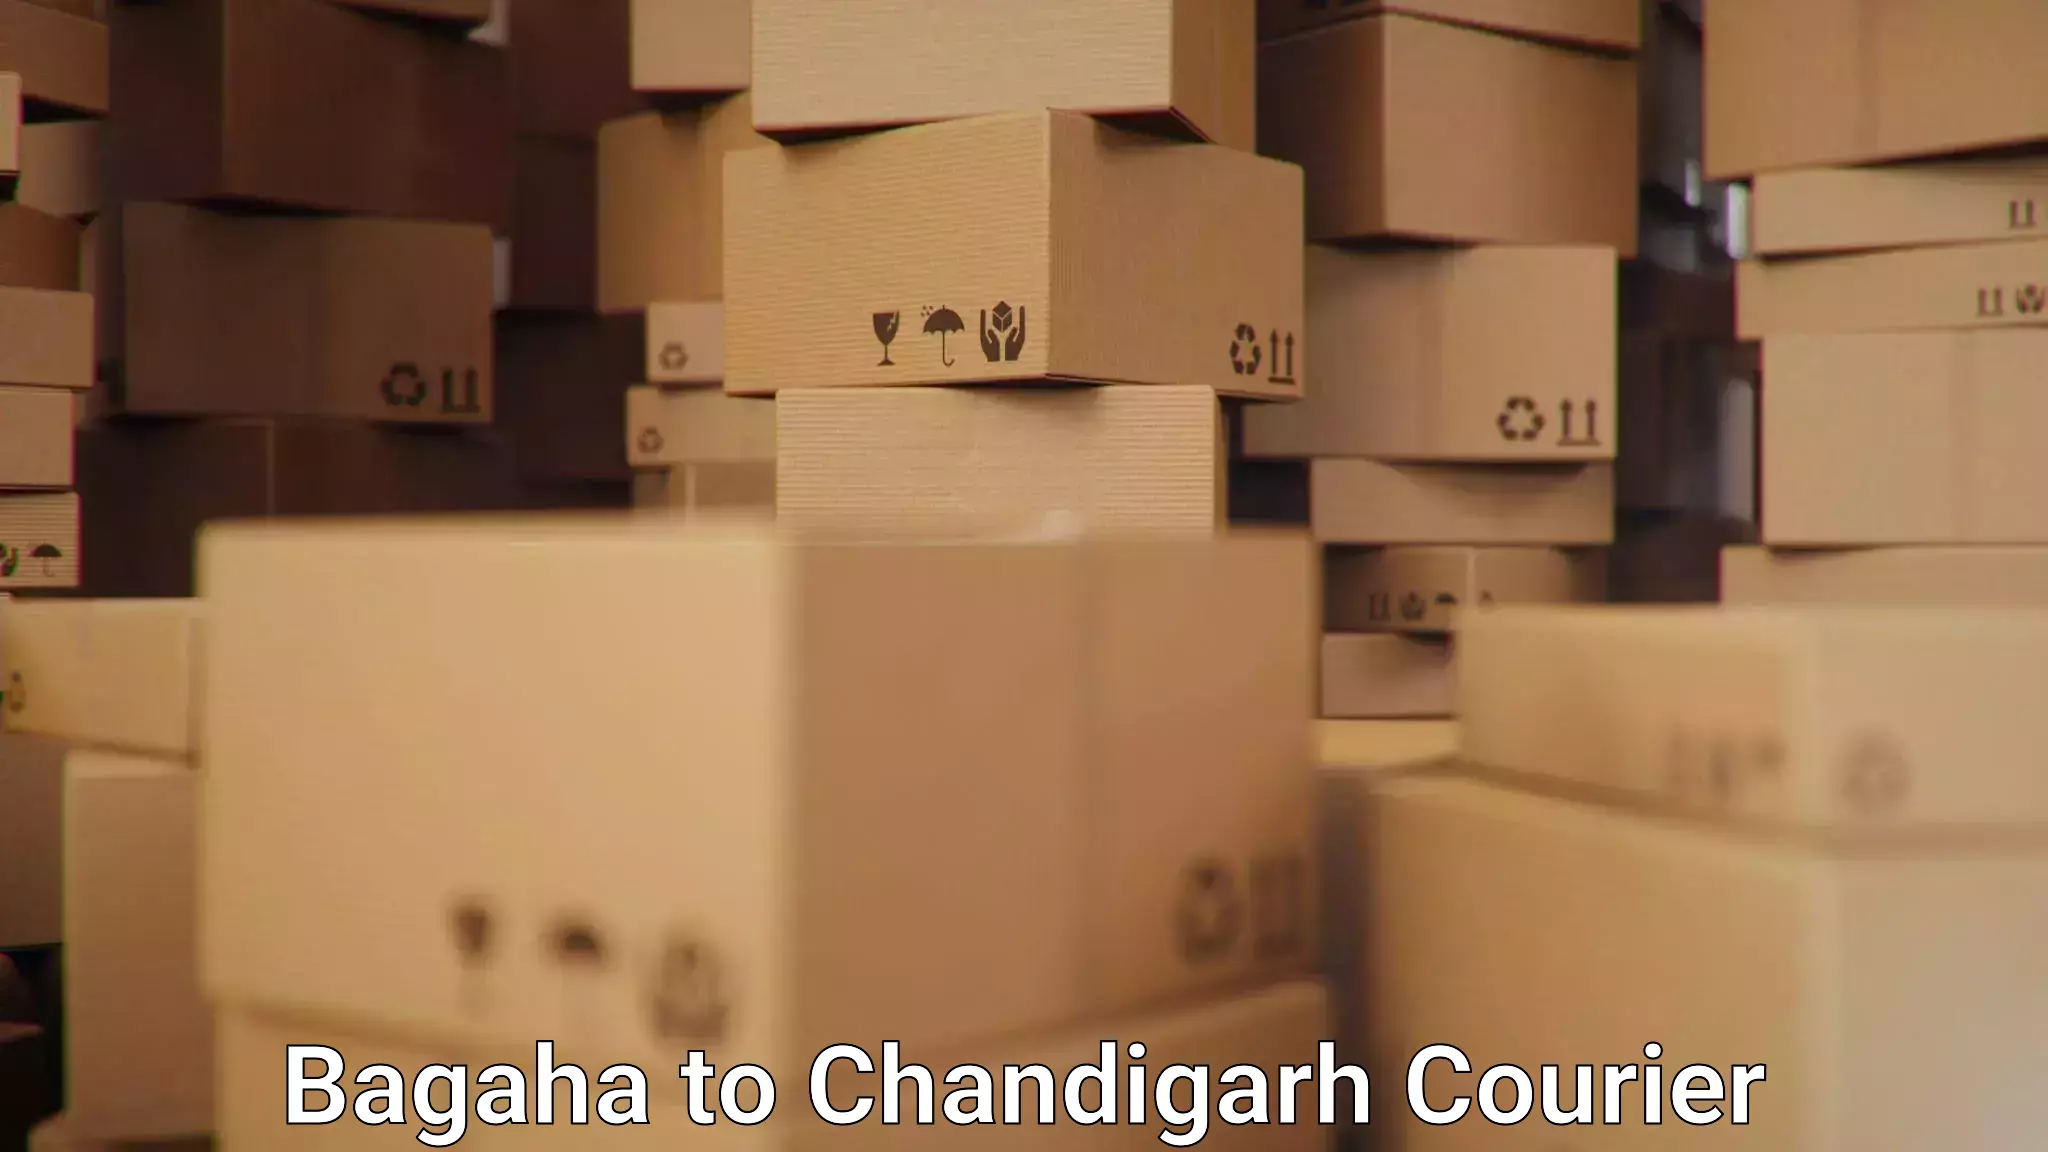 Courier service partnerships Bagaha to Chandigarh